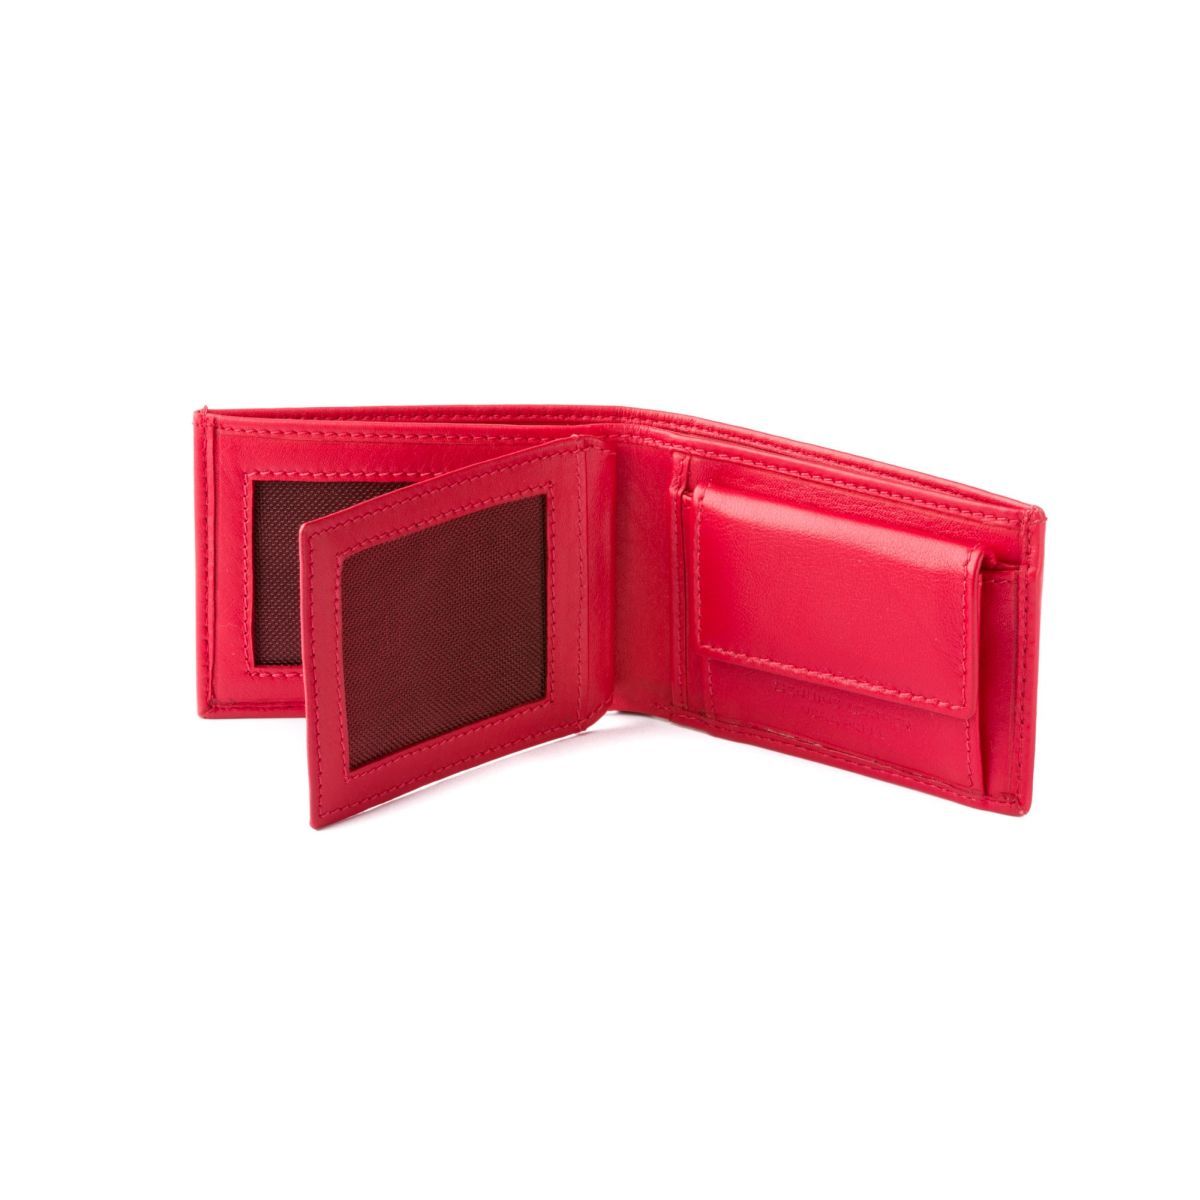 Cardinal Red Leather Wallet | Cardinal Wallets